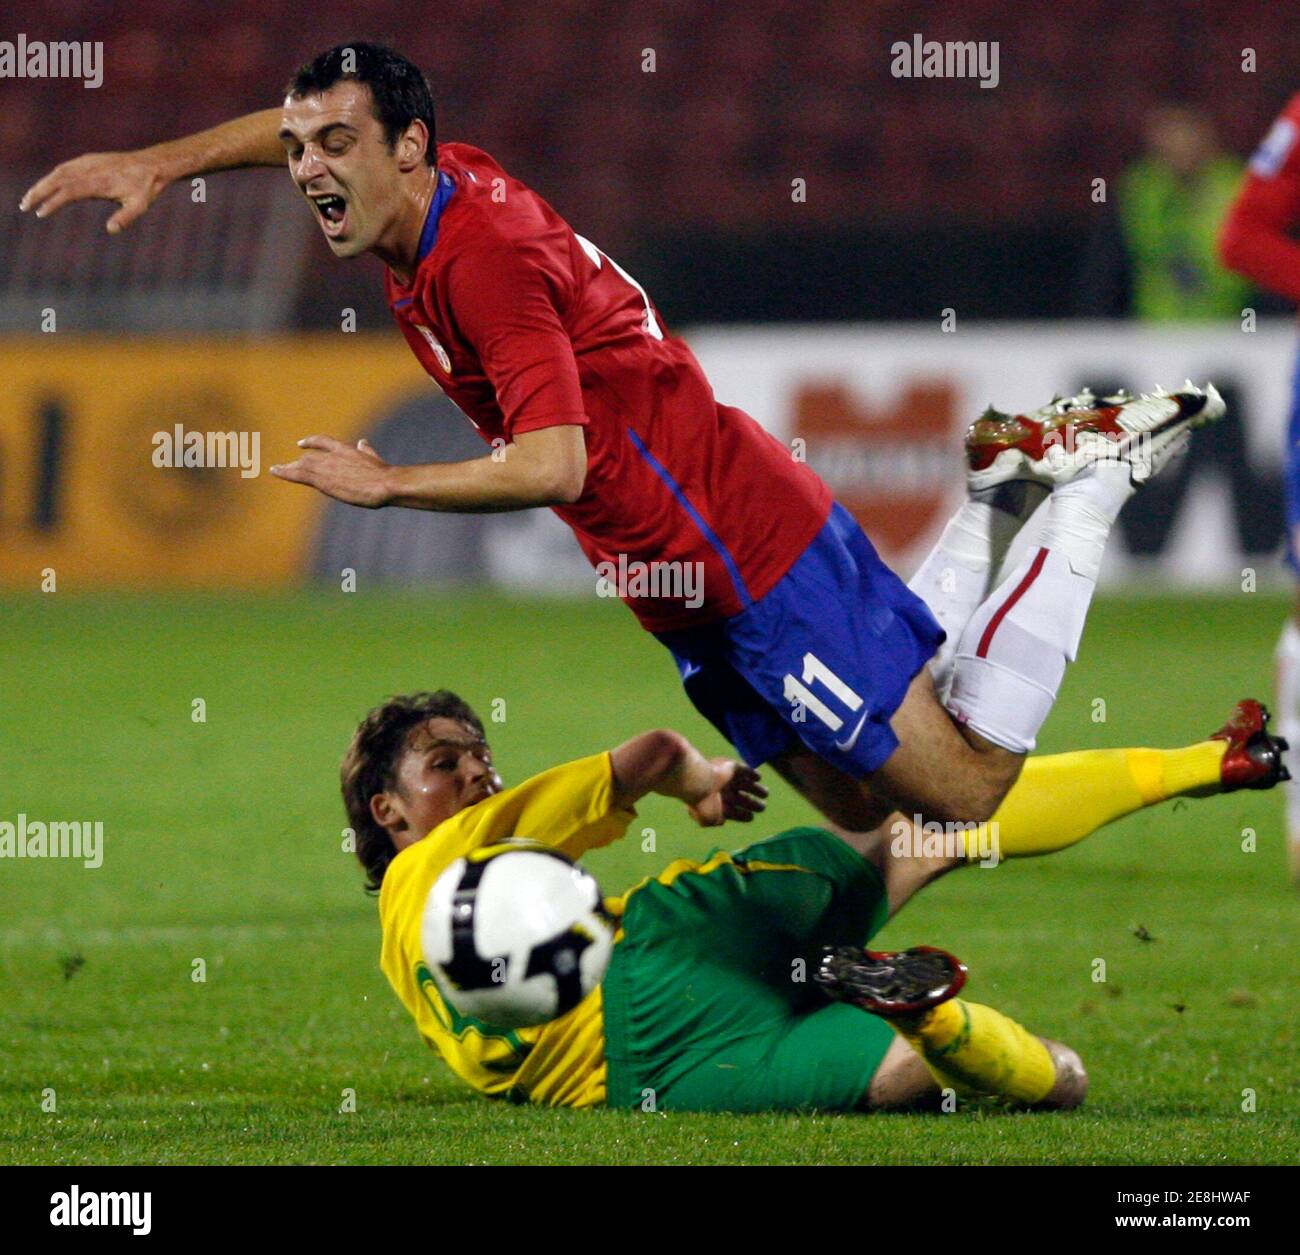 Serbia's Nenad Milijas (L) battles for the ball with Lithuania's Sauliks Makoliunas during their FIFA World Cup 2010 qualifying match in Belgrade, October 11, 2008.   REUTERS/Ivan Milutinovic (SERBIA) Stock Photo